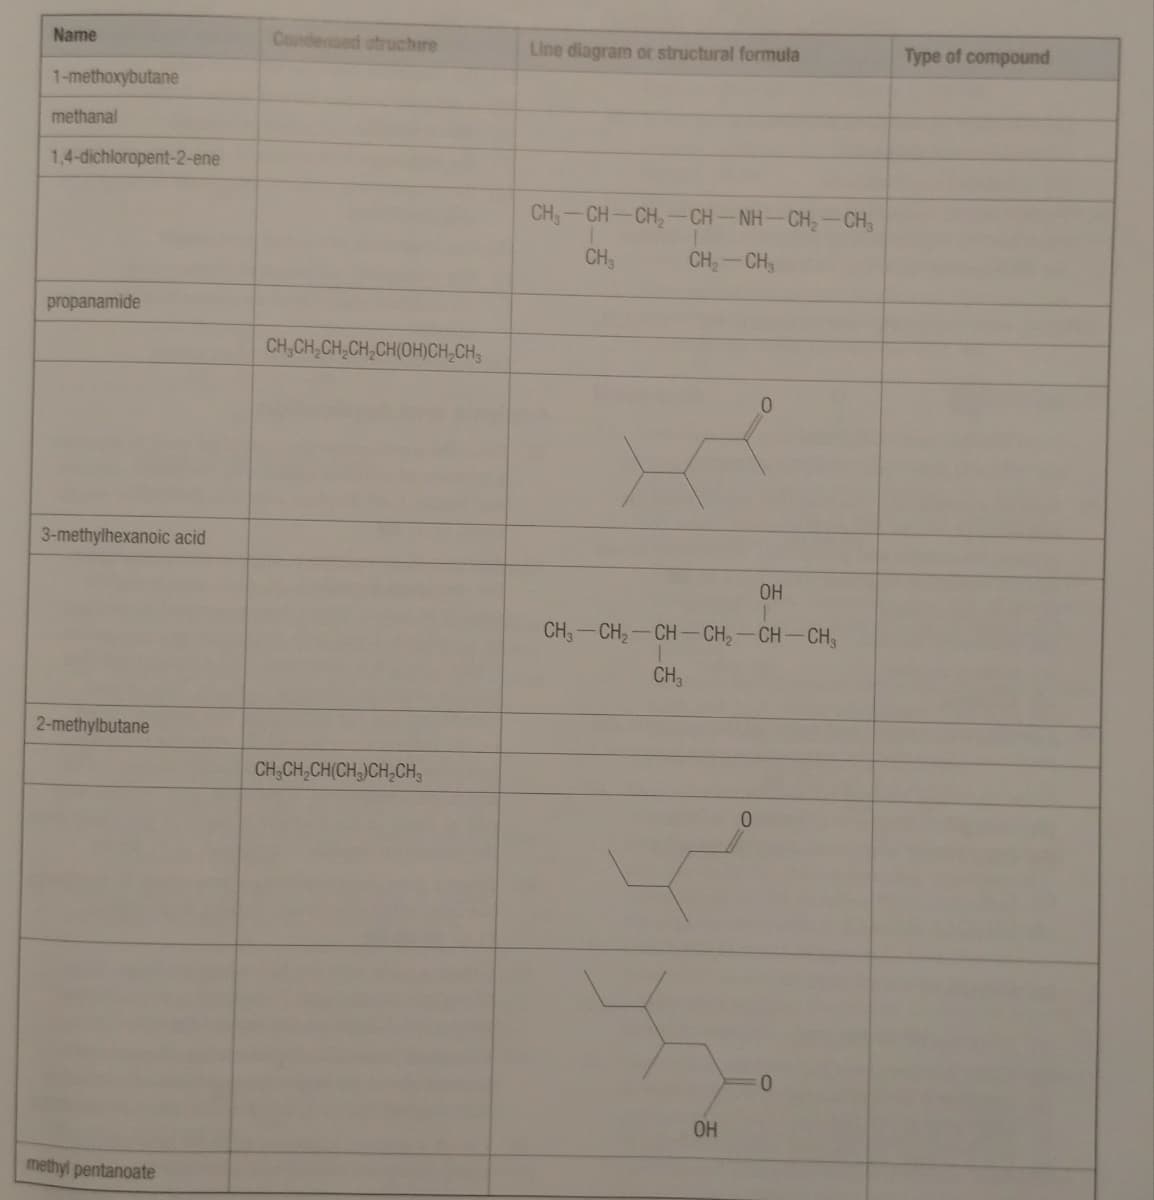 Name
Condensed atruchire
Line diagram or structural formula
Type of compound
1-methoxybutane
methanal
1,4-dichloropent-2-ene
CH,-CH-CH, -CH-NH-CH,-CH,
CH3
CH-CH
propanamide
CH,CH,CH,CH,CH(OH)CH,CH,
0.
3-methylhexanoic acid
OH
CH3-CH-CH-CH,-CH-CH
CH
2-methylbutane
CH,CH,CH(CH,)CH,CH,
OH
methyl pentanoate
